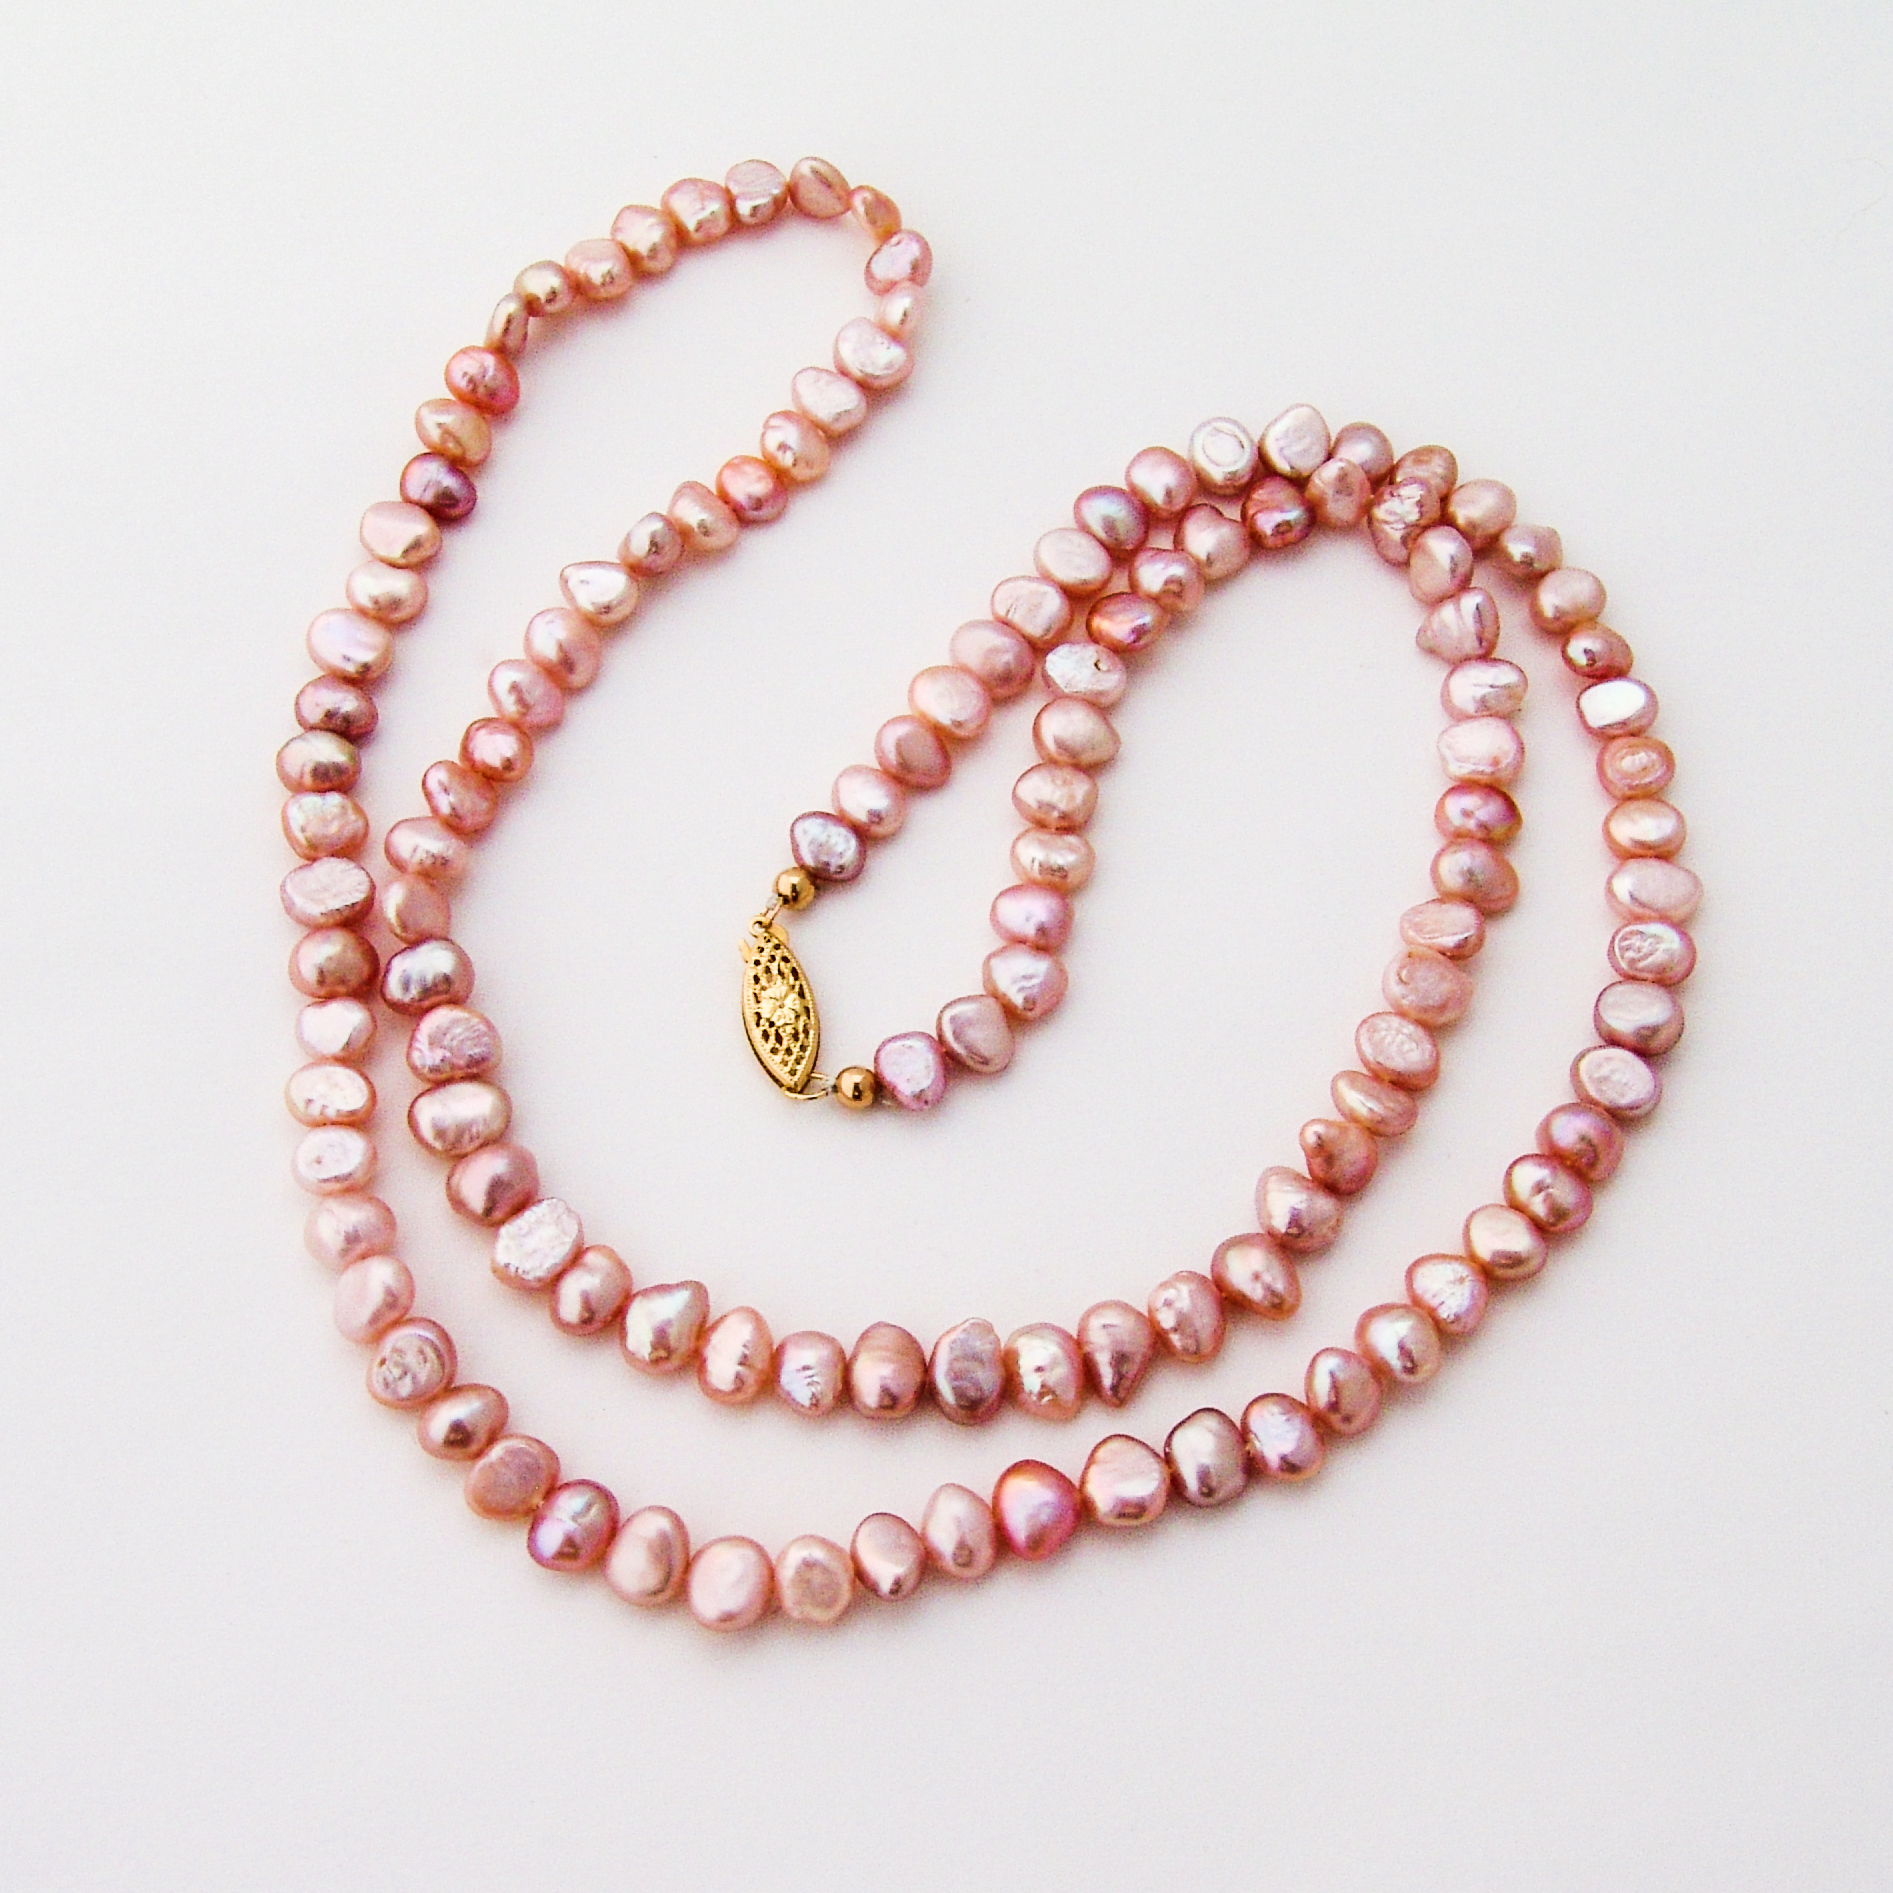 Freshwater pearls necklace petal pink strand choker vintage jewelry accessories